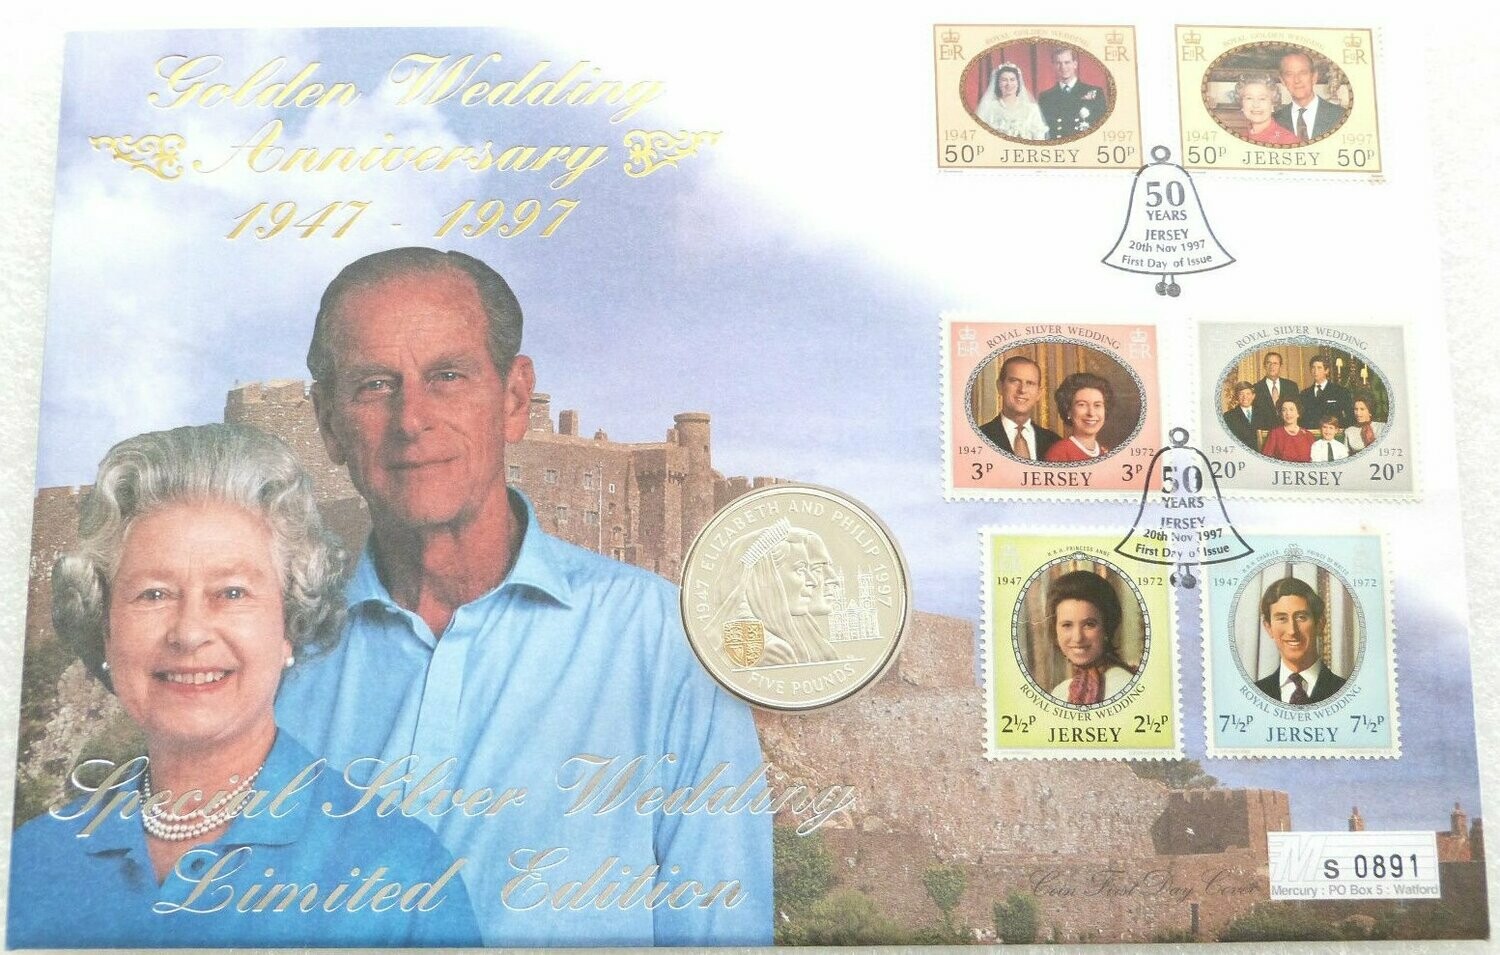 1997 Jersey Golden Wedding £5 Silver Proof Coin First Day Cover